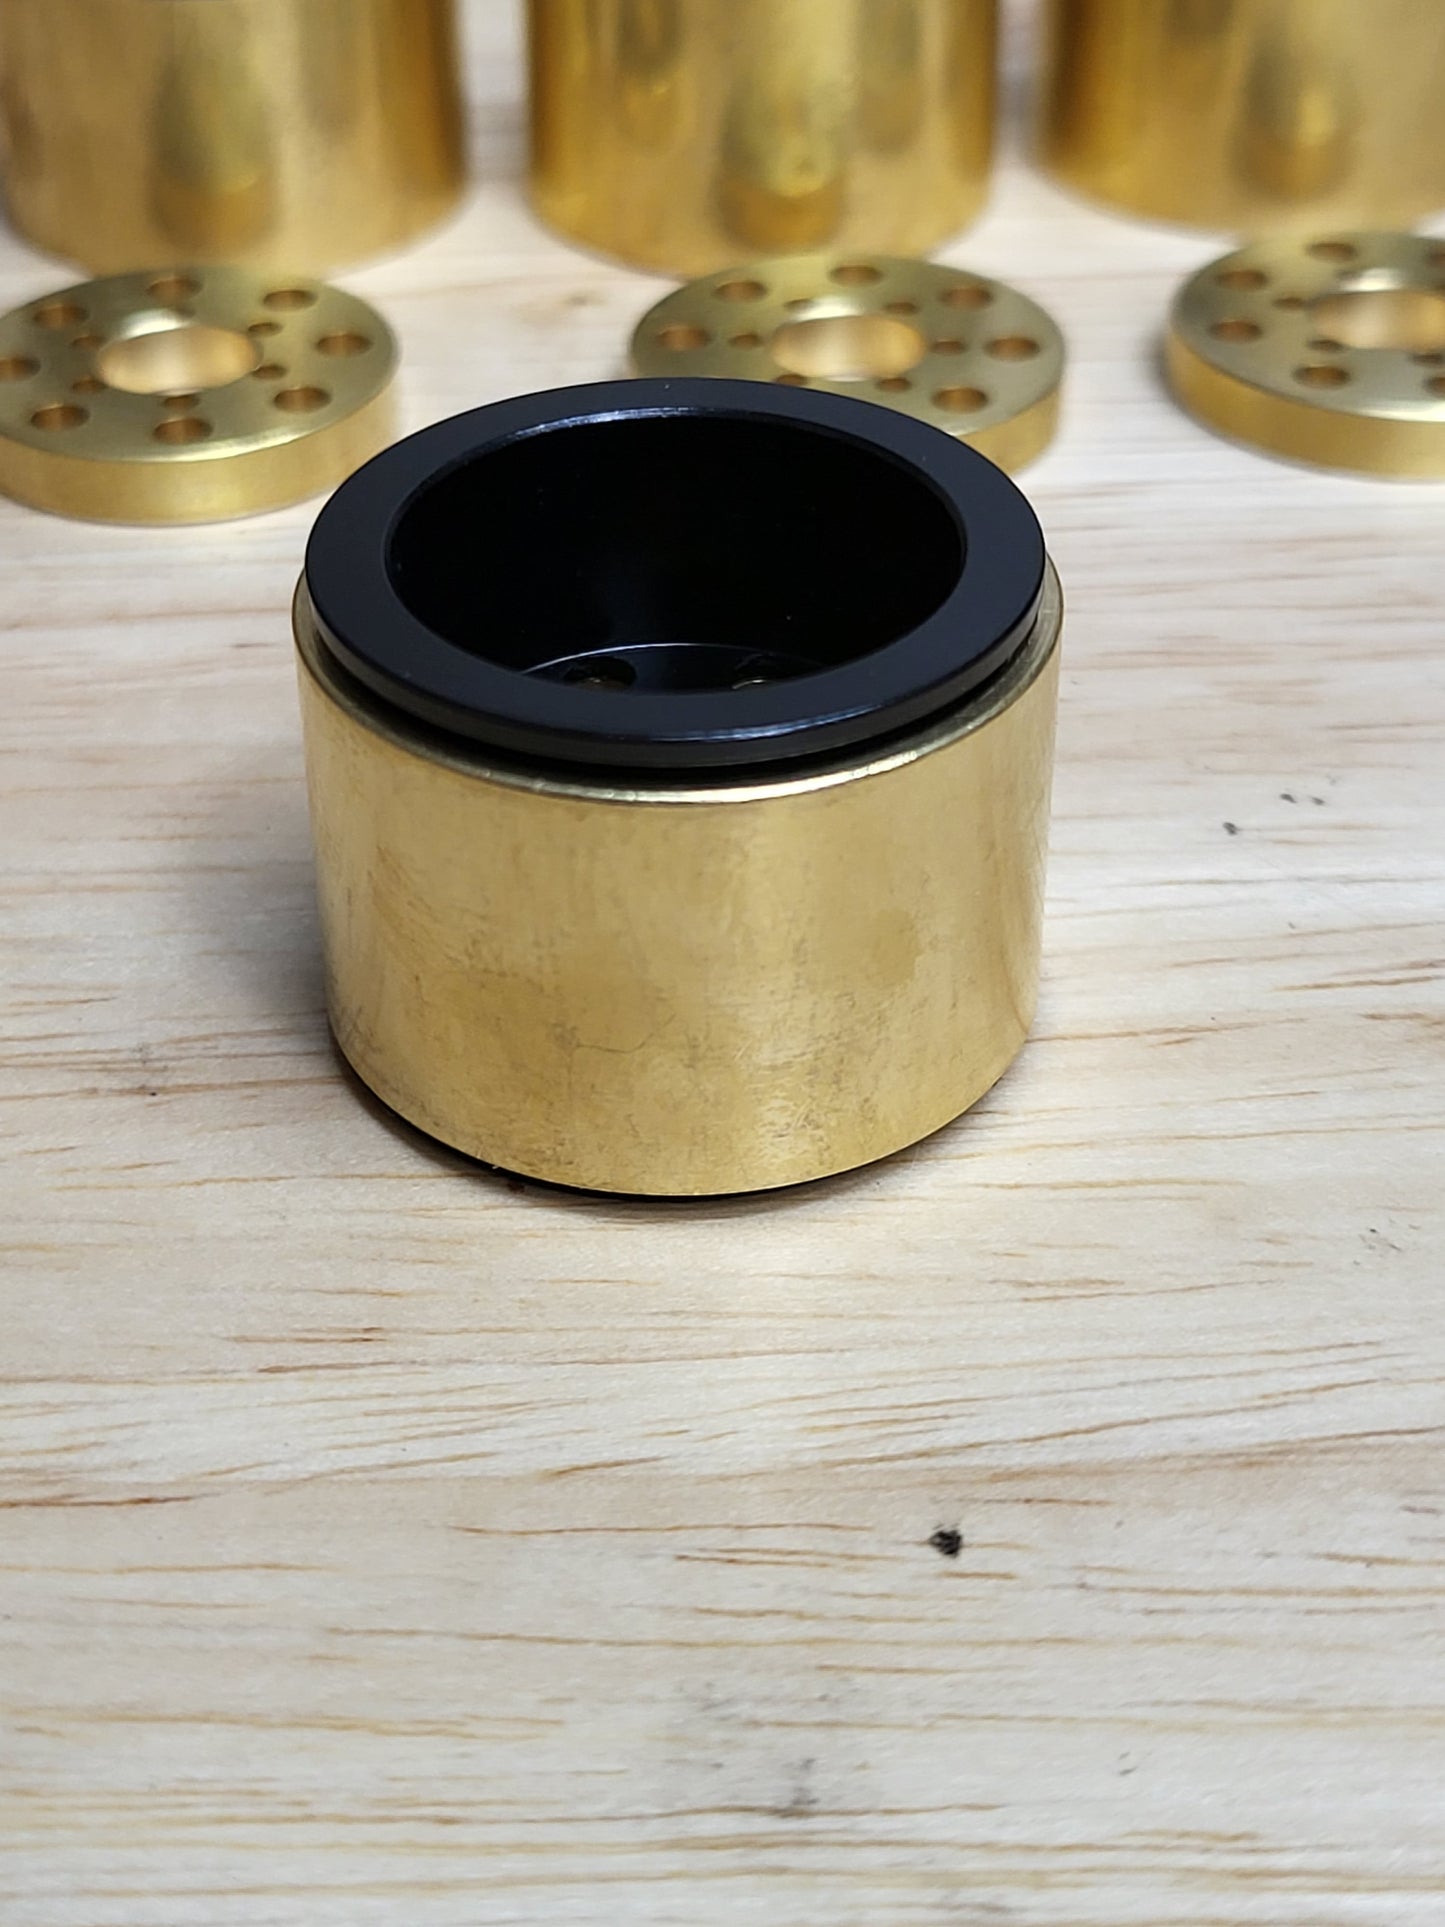 Island style wheel spacers and rings For UPW and DDP wheels, brass or aluminum